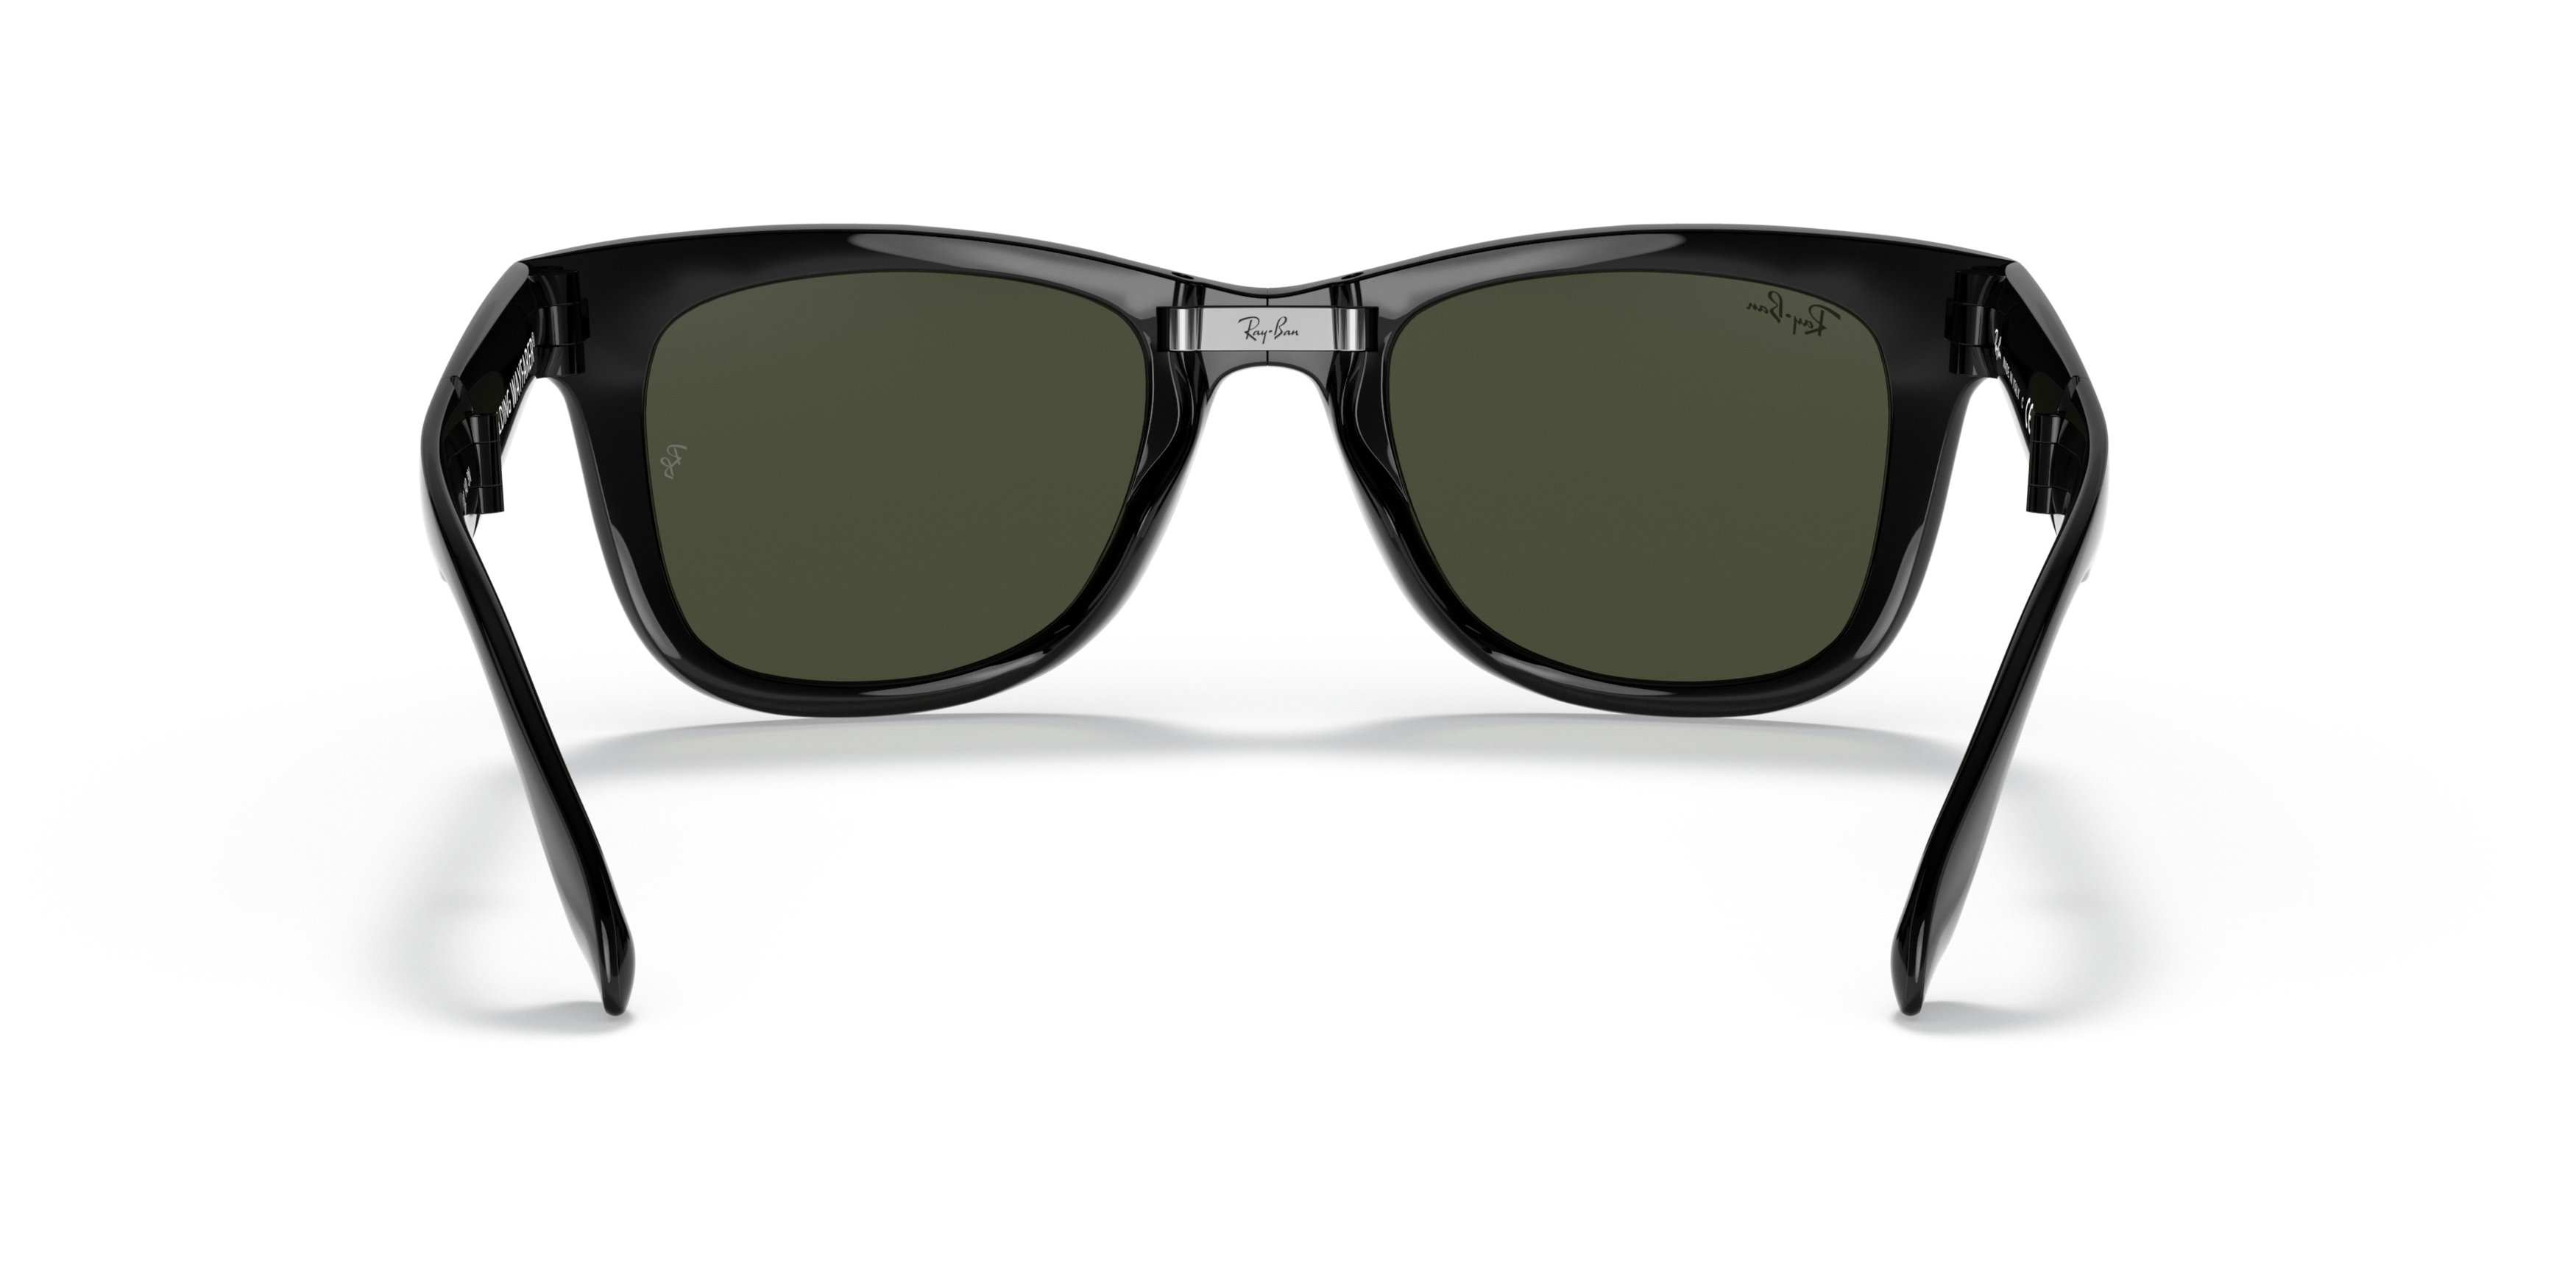 [products.image.detail02] Ray-Ban Wayfarer Folding Classic RB4105 601